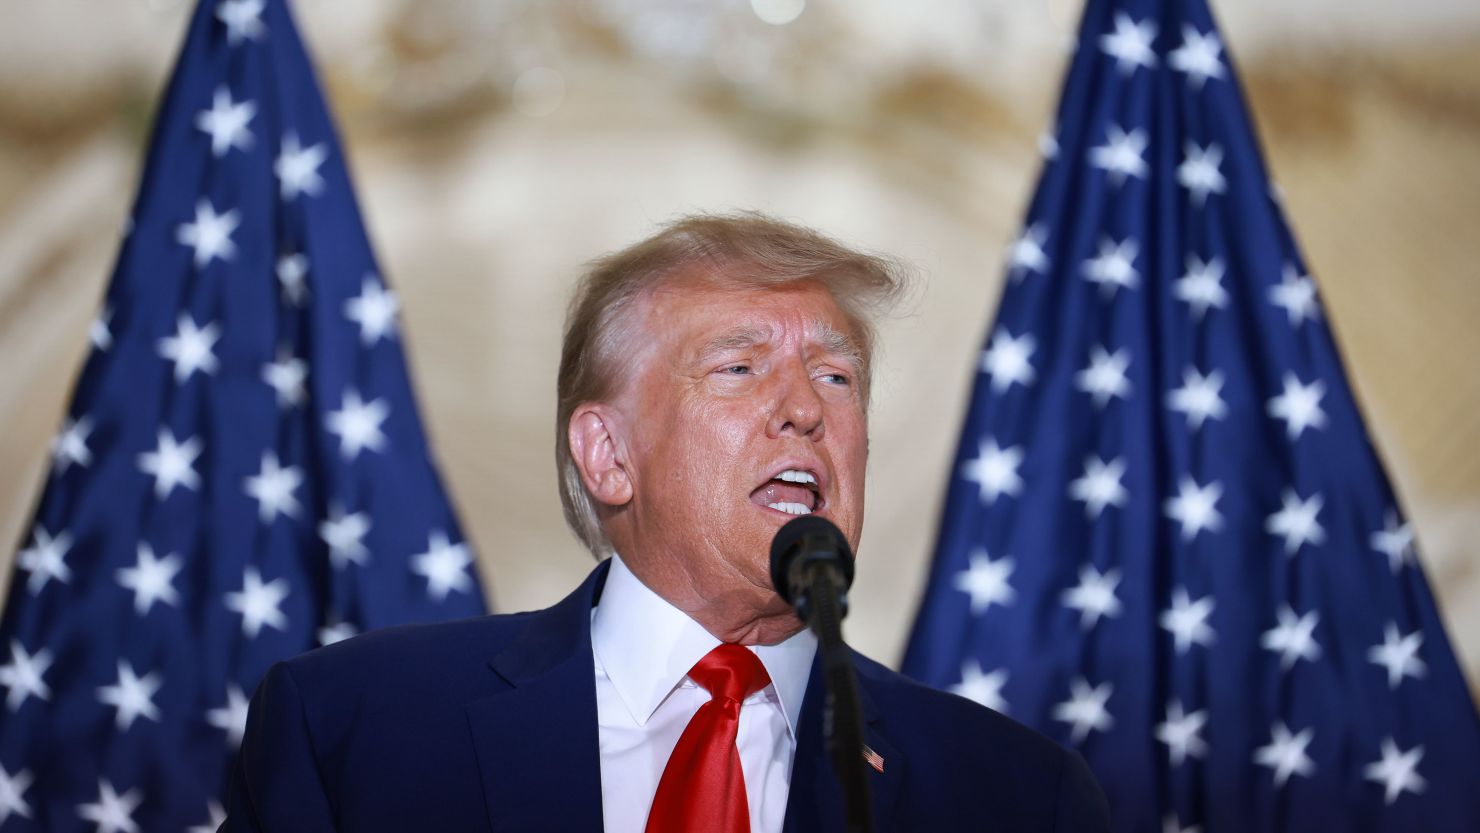 Former President Donald Trump speaks during an event at the Mar-a-Lago Club April 4, 2023 in West Palm Beach, Florida. 